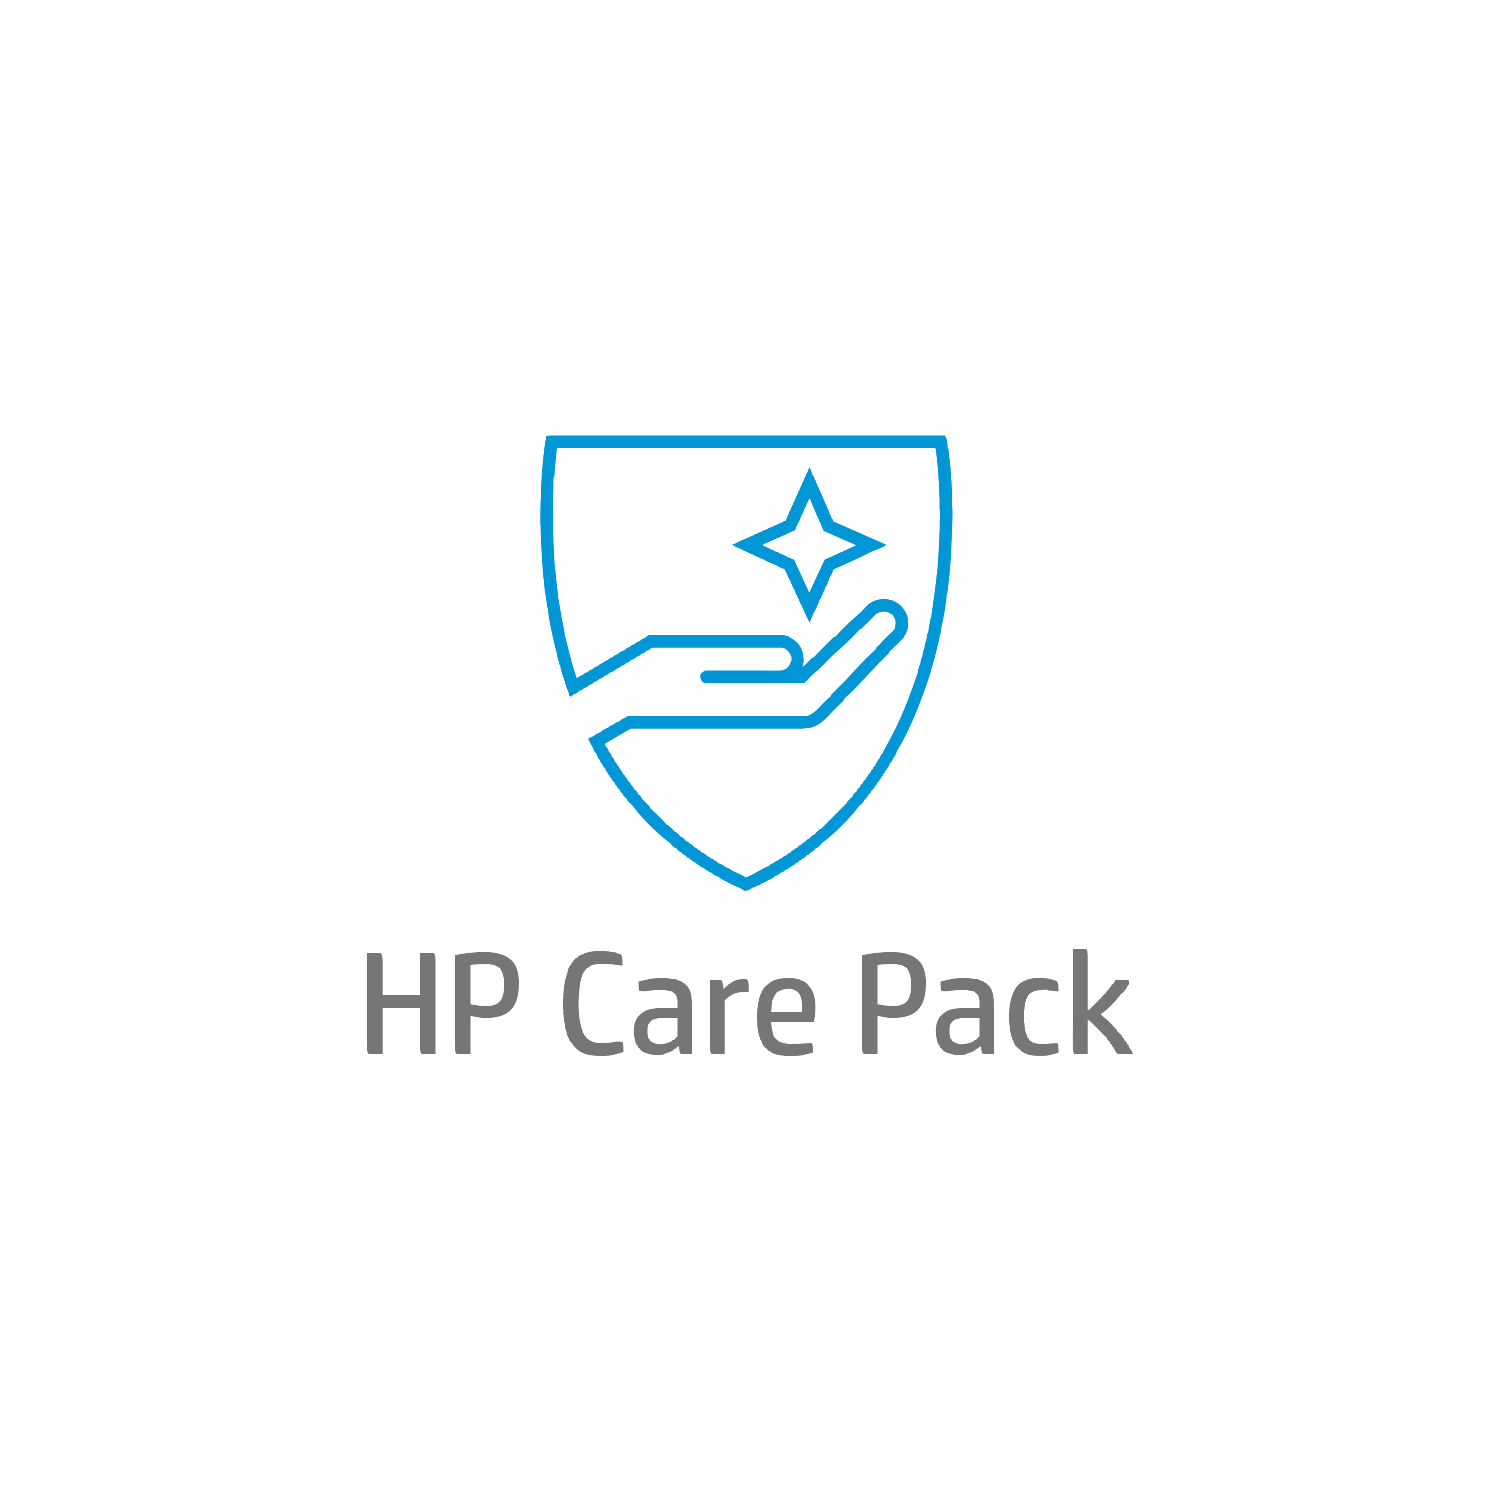 Bild von HP 5y Active Care Next Business Day Response Onsite w/1x DLE NB HW Supp, Active Care, Remote and Onsite, In warranty, Standard workdays - 9 hours, 5 years, Next business day response